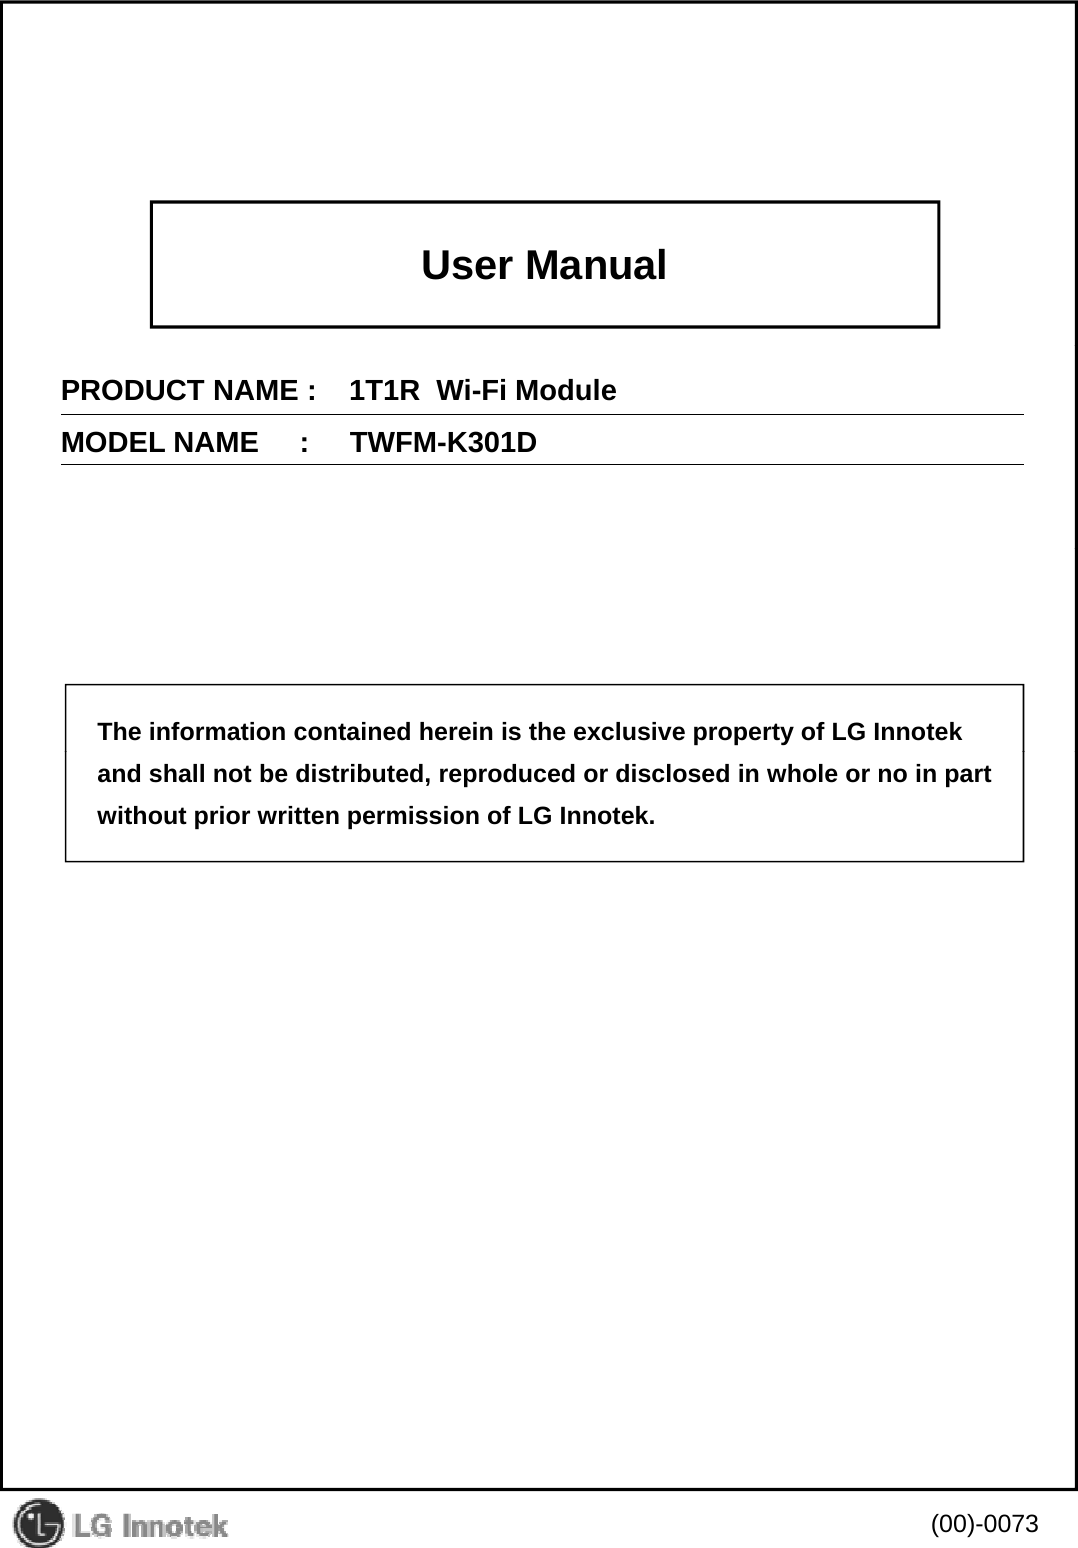 User ManualPRODUCT NAME :    1T1R  Wi-Fi ModuleMODEL NAME     :     TWFM-K301DThe information contained herein is the exclusive property of LG Innotekand shall not be distributed, reproduced or disclosed in whole or no in partwithout prior written permission of LG Innotek.(00)-0073